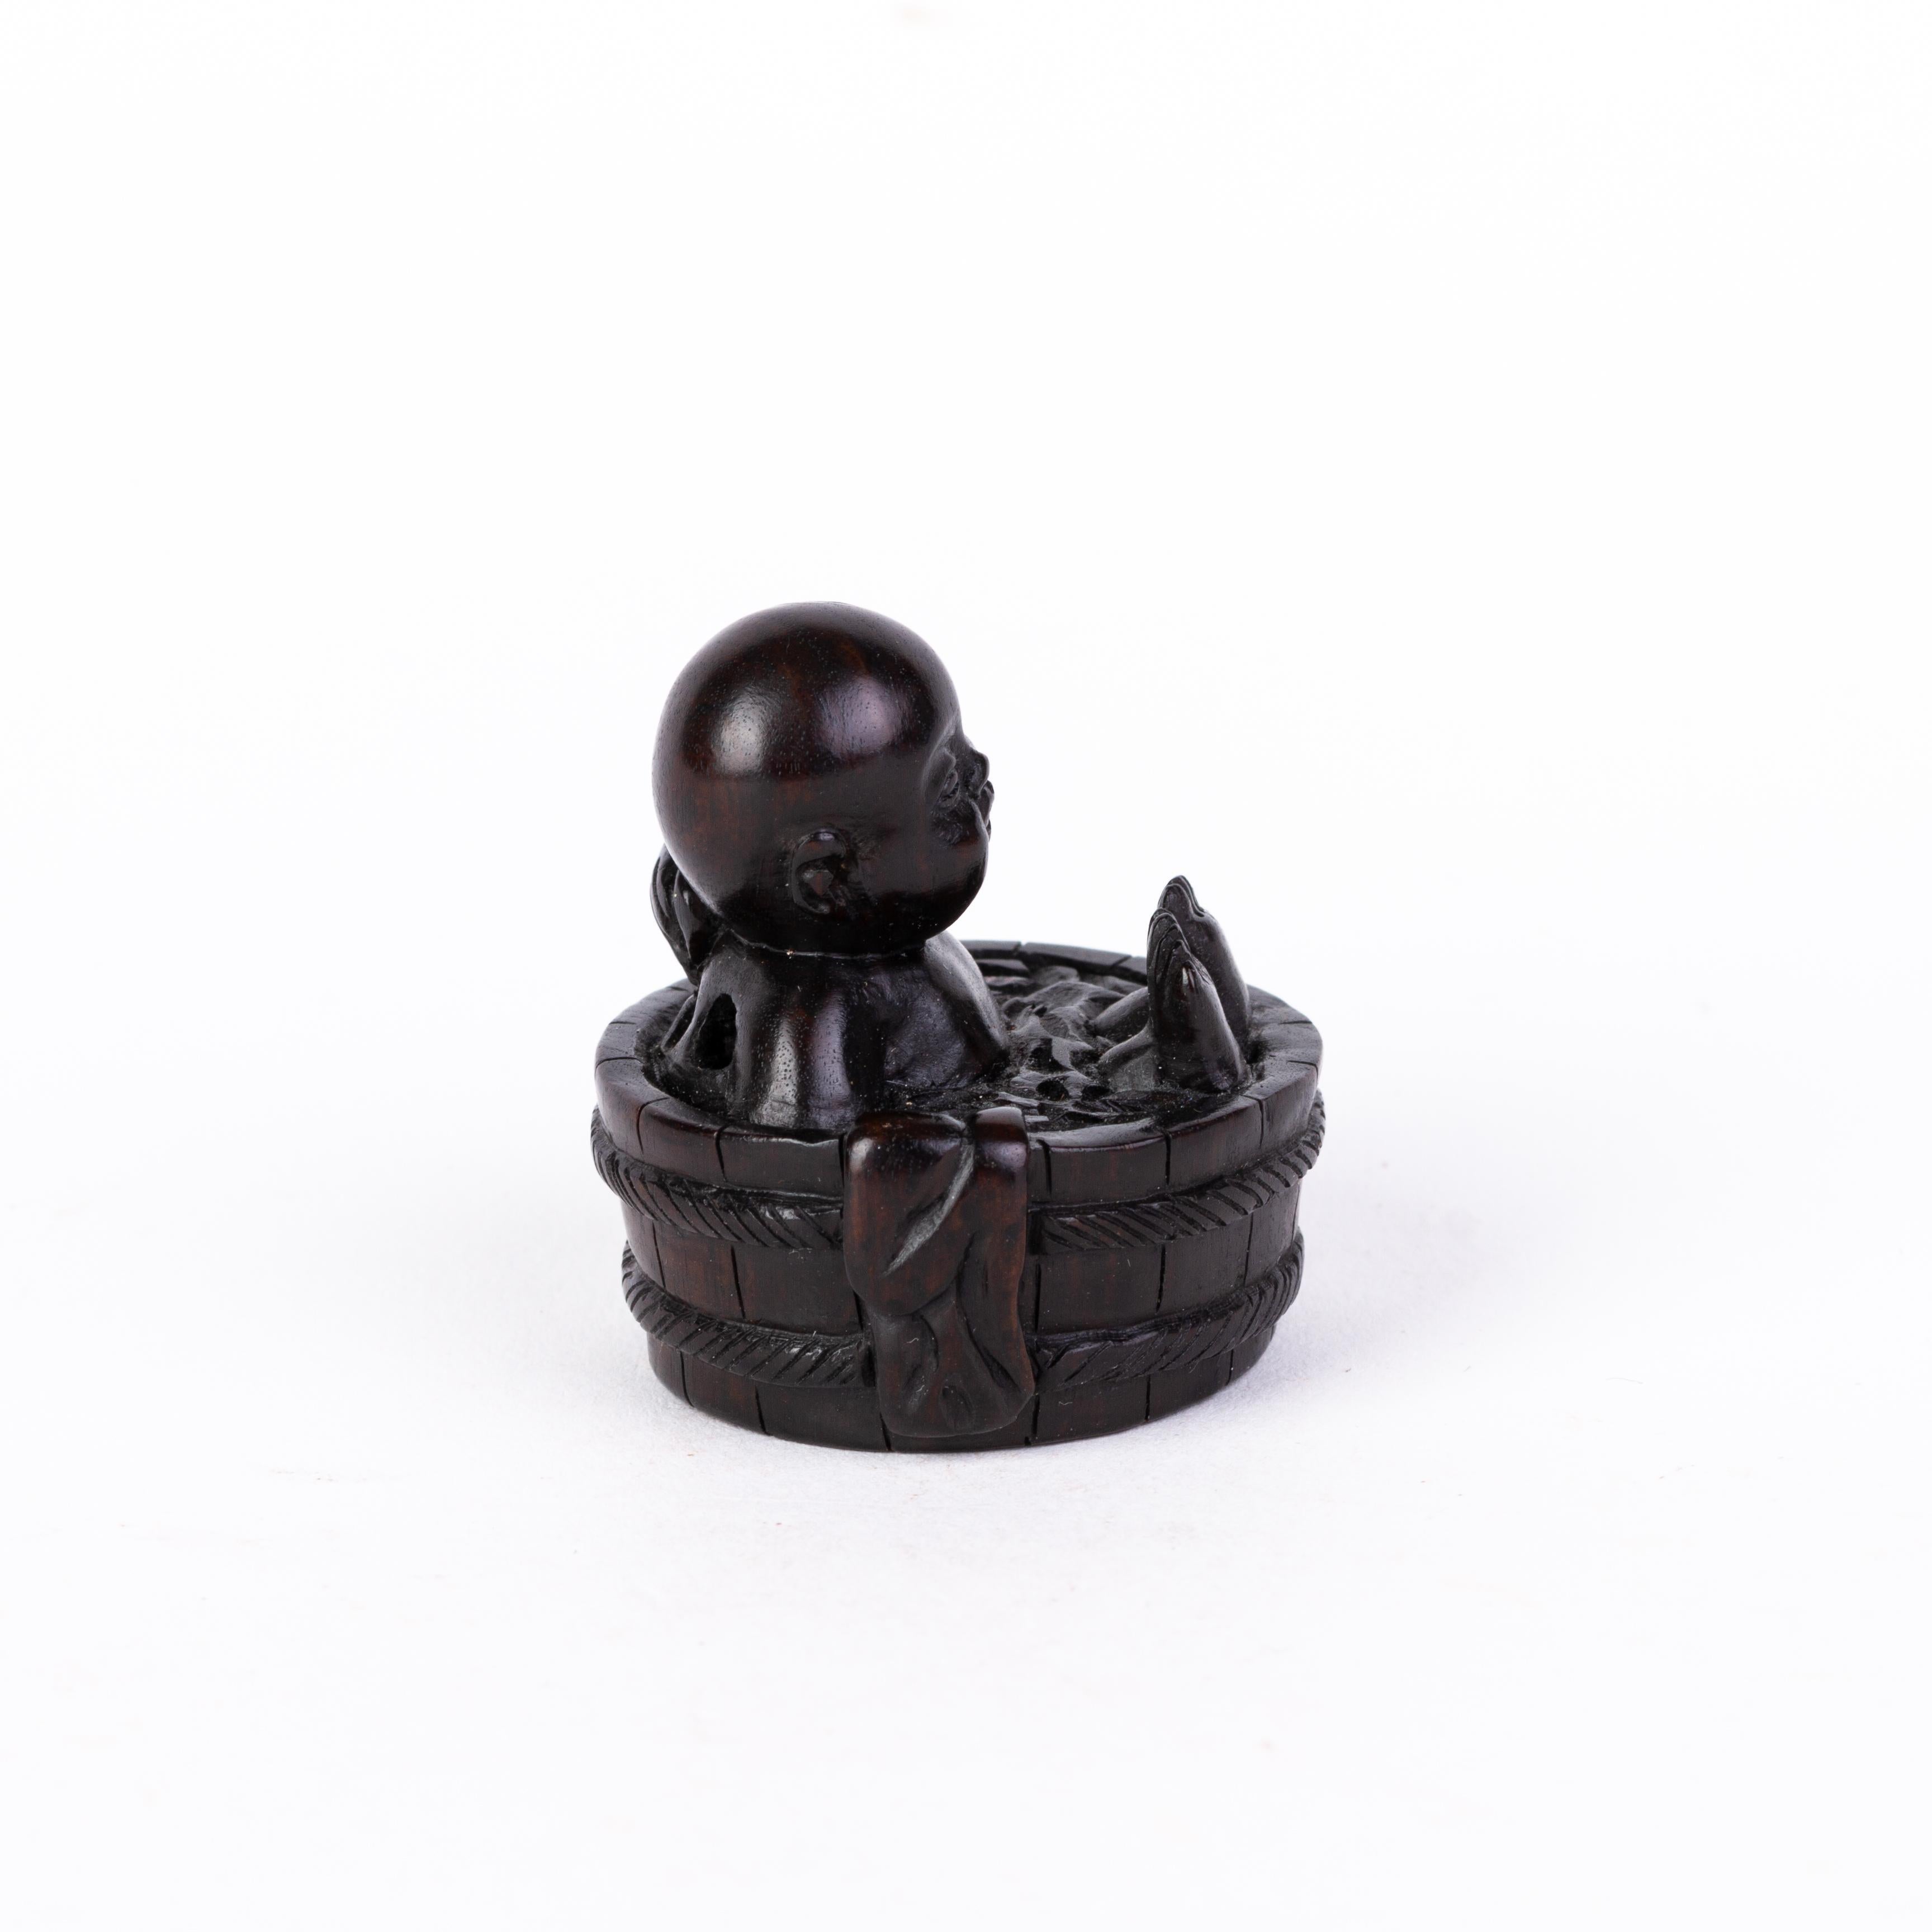 Signed Japanese Carved Ebony Wood Netsuke Boy Bathing Inro Ojime
Very good condition.
From a private collection.
Free international shipping.